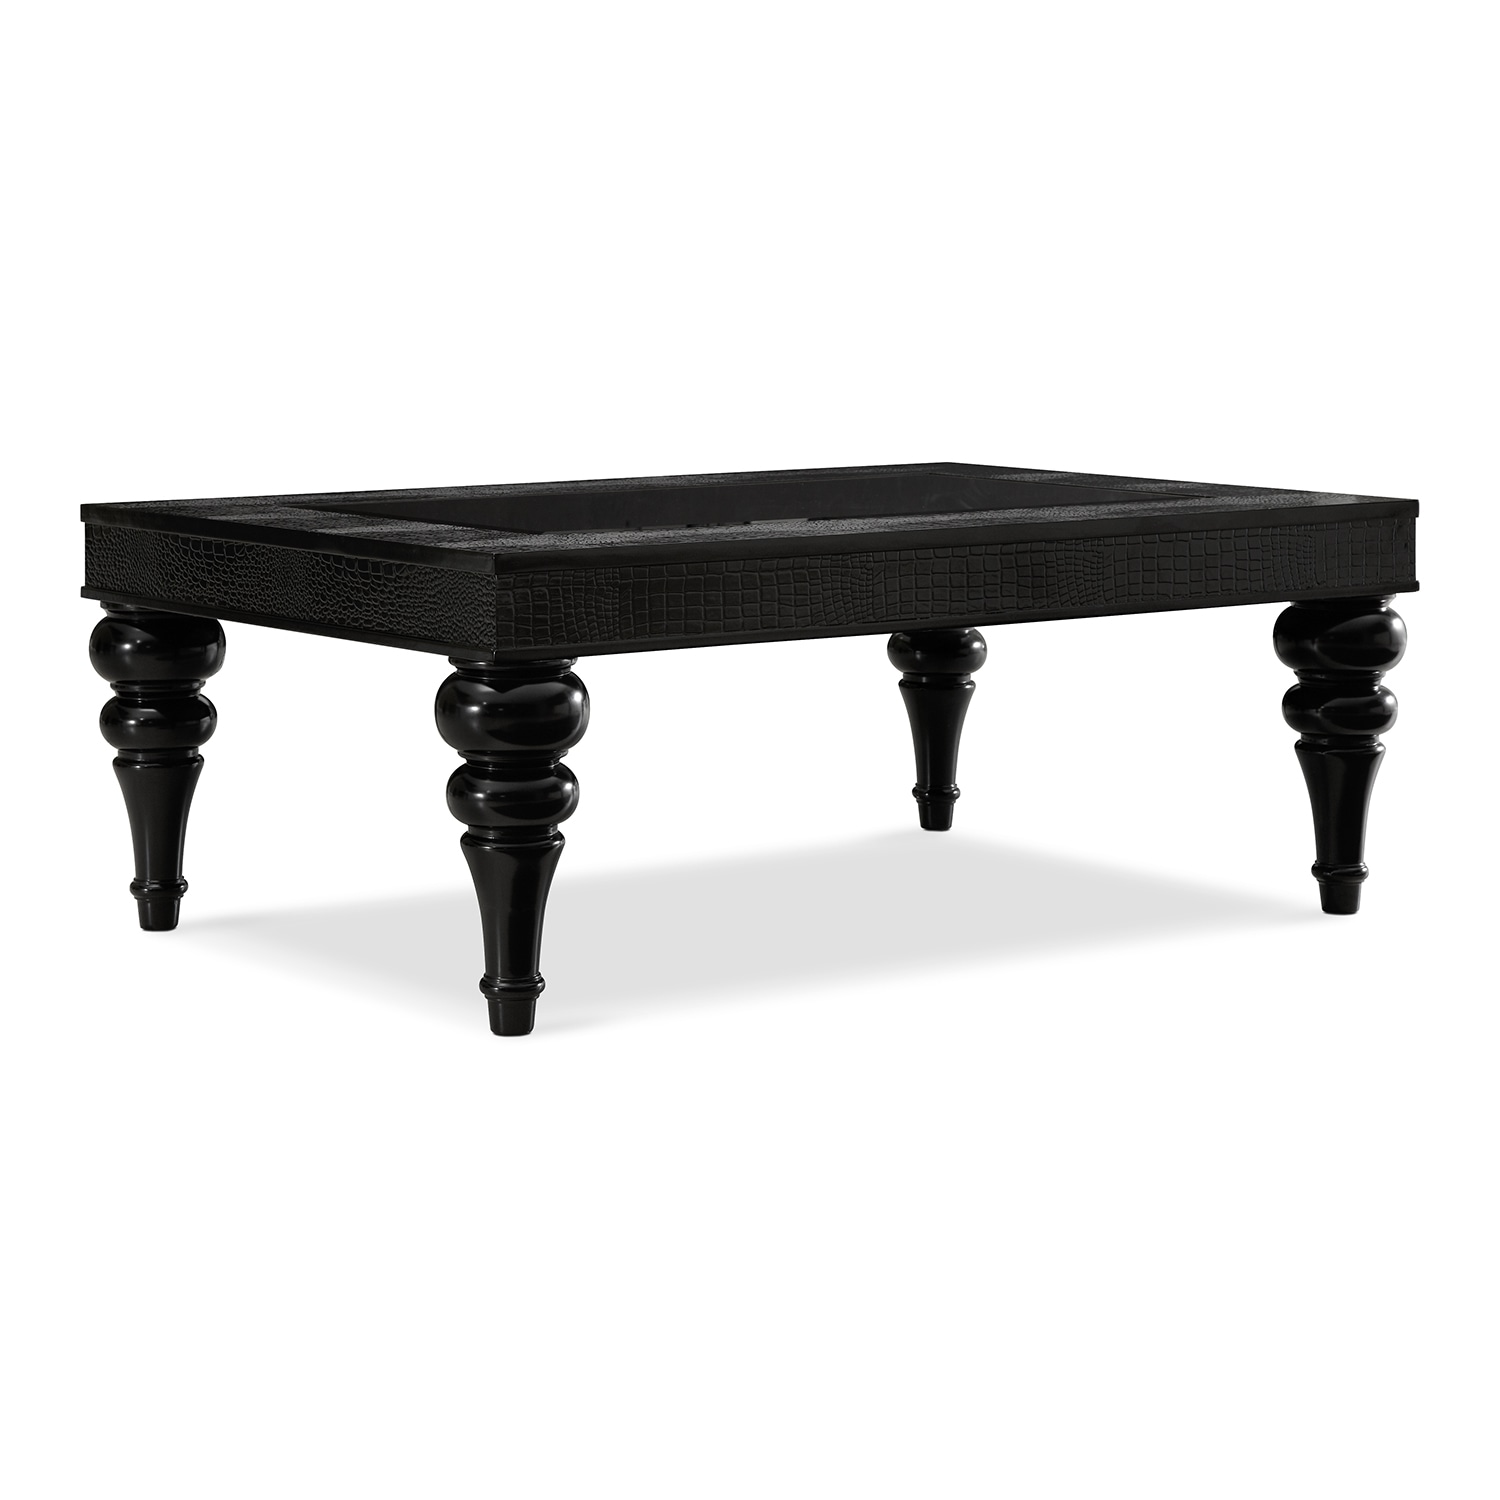 coffee tables living room value city ese accent table tap change paradiso black croc mcguire furniture bedroom essentials keter pacific cool bar carpet door threshold lap desk